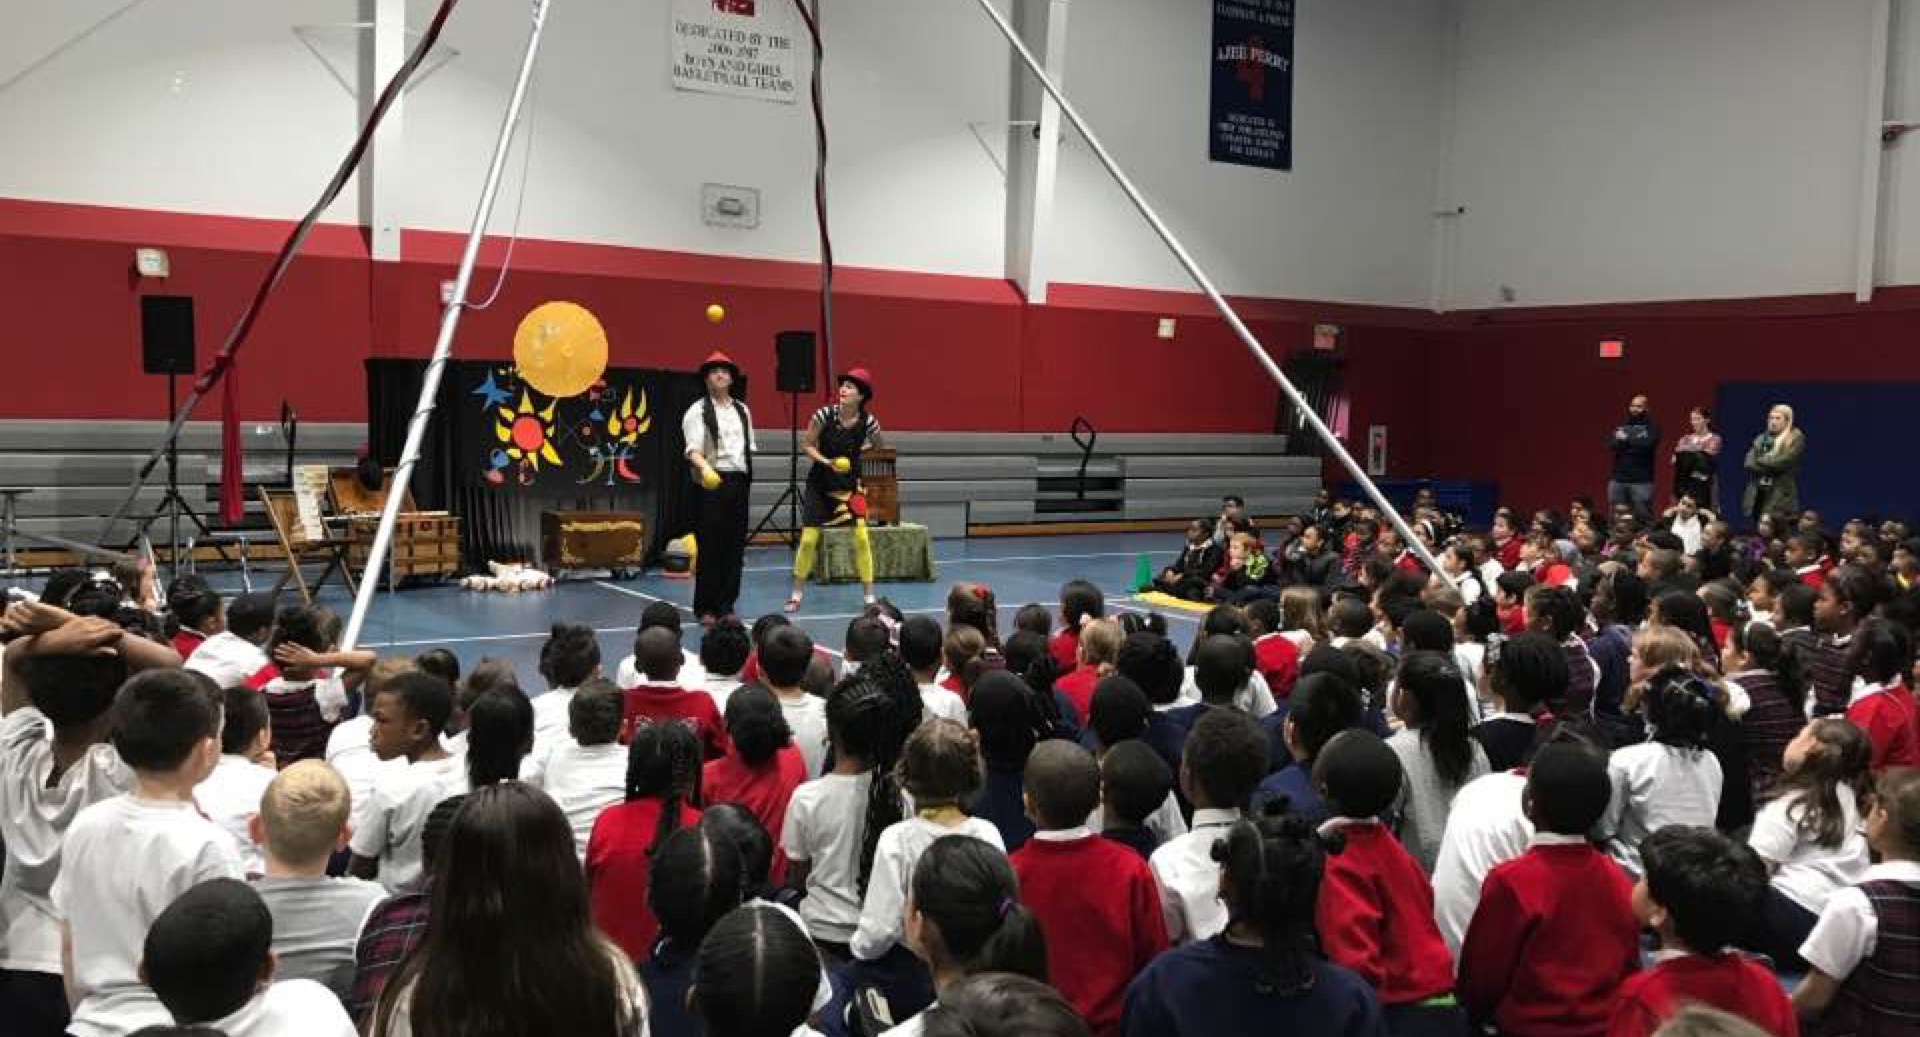 2 jugglers surrounded by a large student audience in a gym